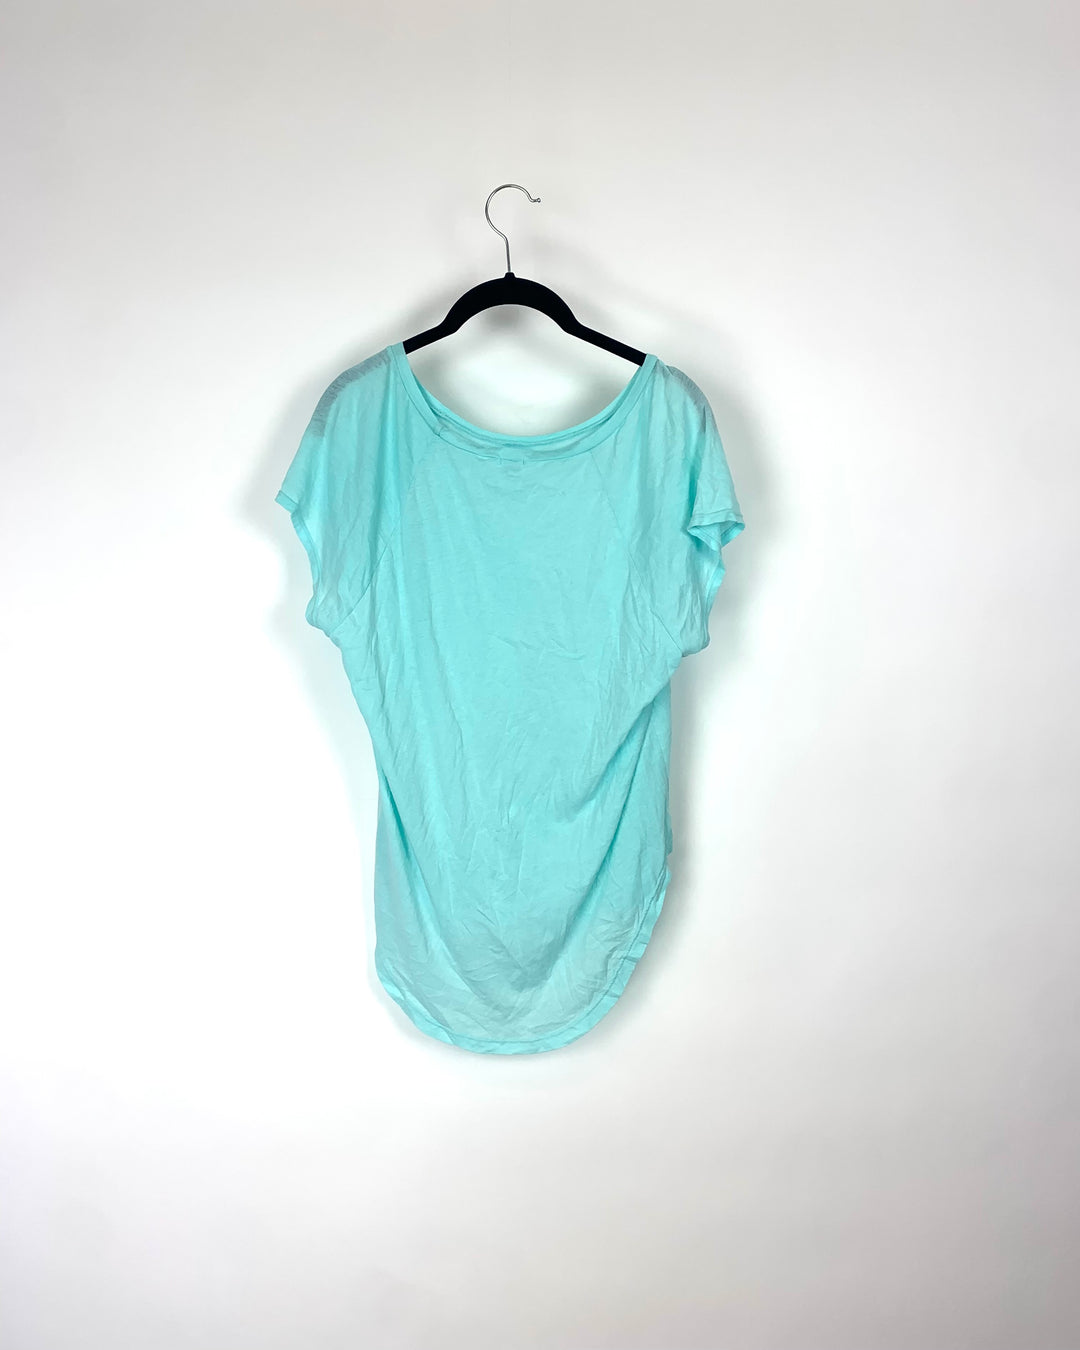 Turquoise T-Shirt - Small